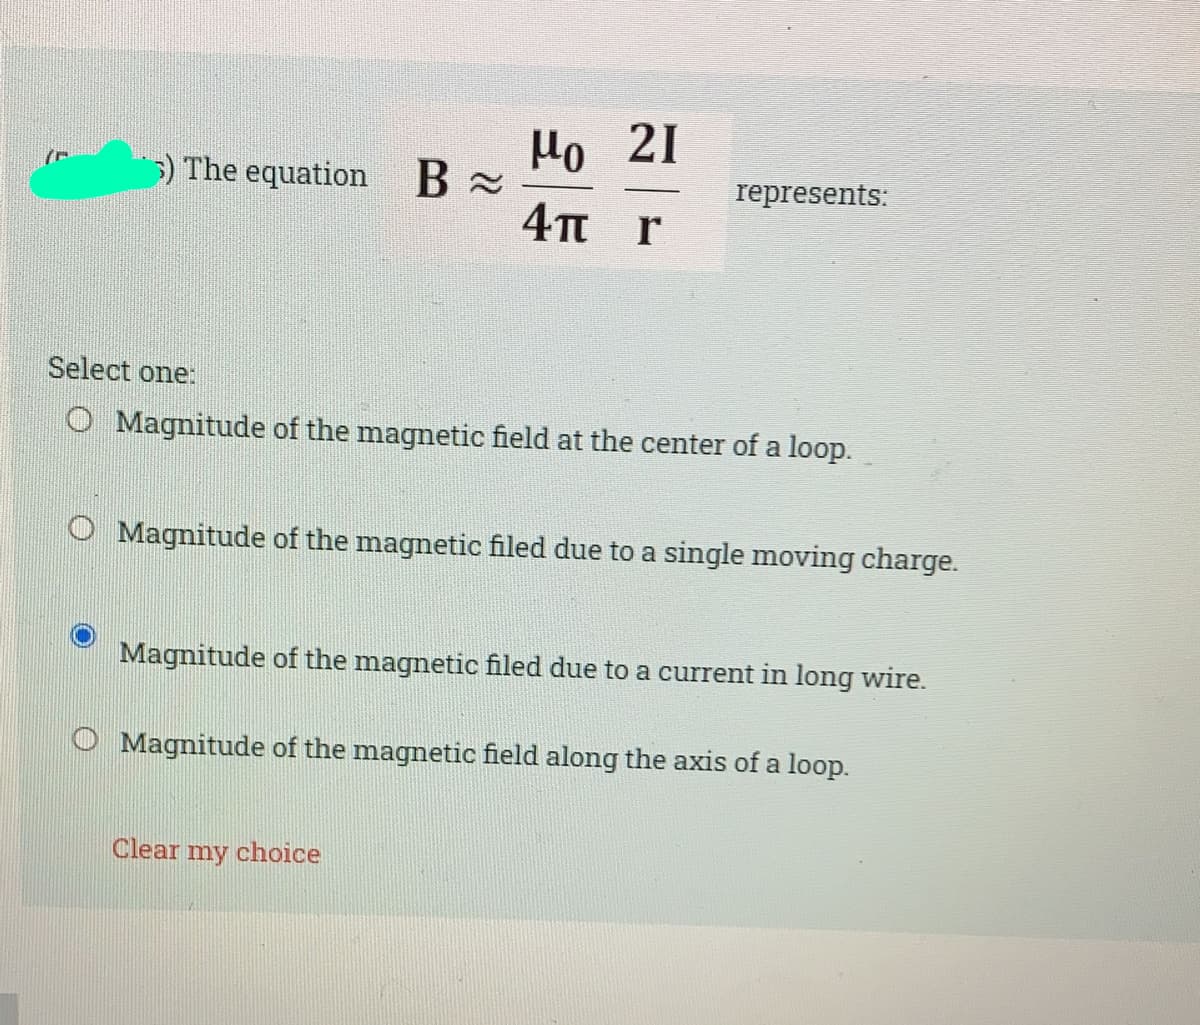 Ho 21
4TT r
5) The equation B x
represents:
Select one:
O Magnitude of the magnetic field at the center of a loop.
O Magnitude of the magnetic filed due to a single moving charge.
Magnitude of the magnetic filed due to a current in long wire.
O Magnitude of the magnetic field along the axis of a loop.
Clear my choice
